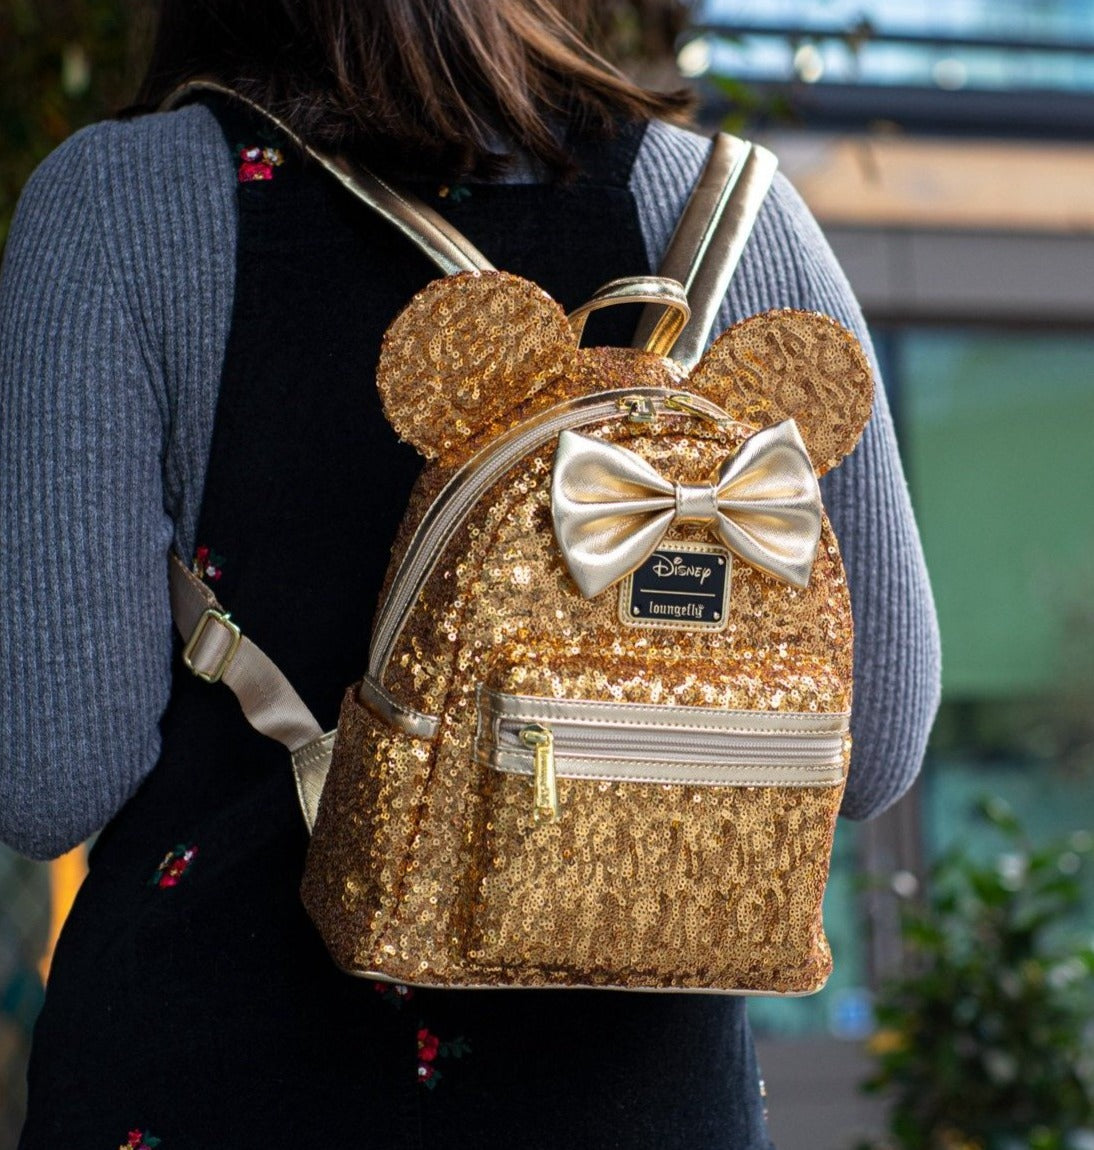 Loungefly x Disney LASR Minnie Yellow Gold Sequin Mini Backpack